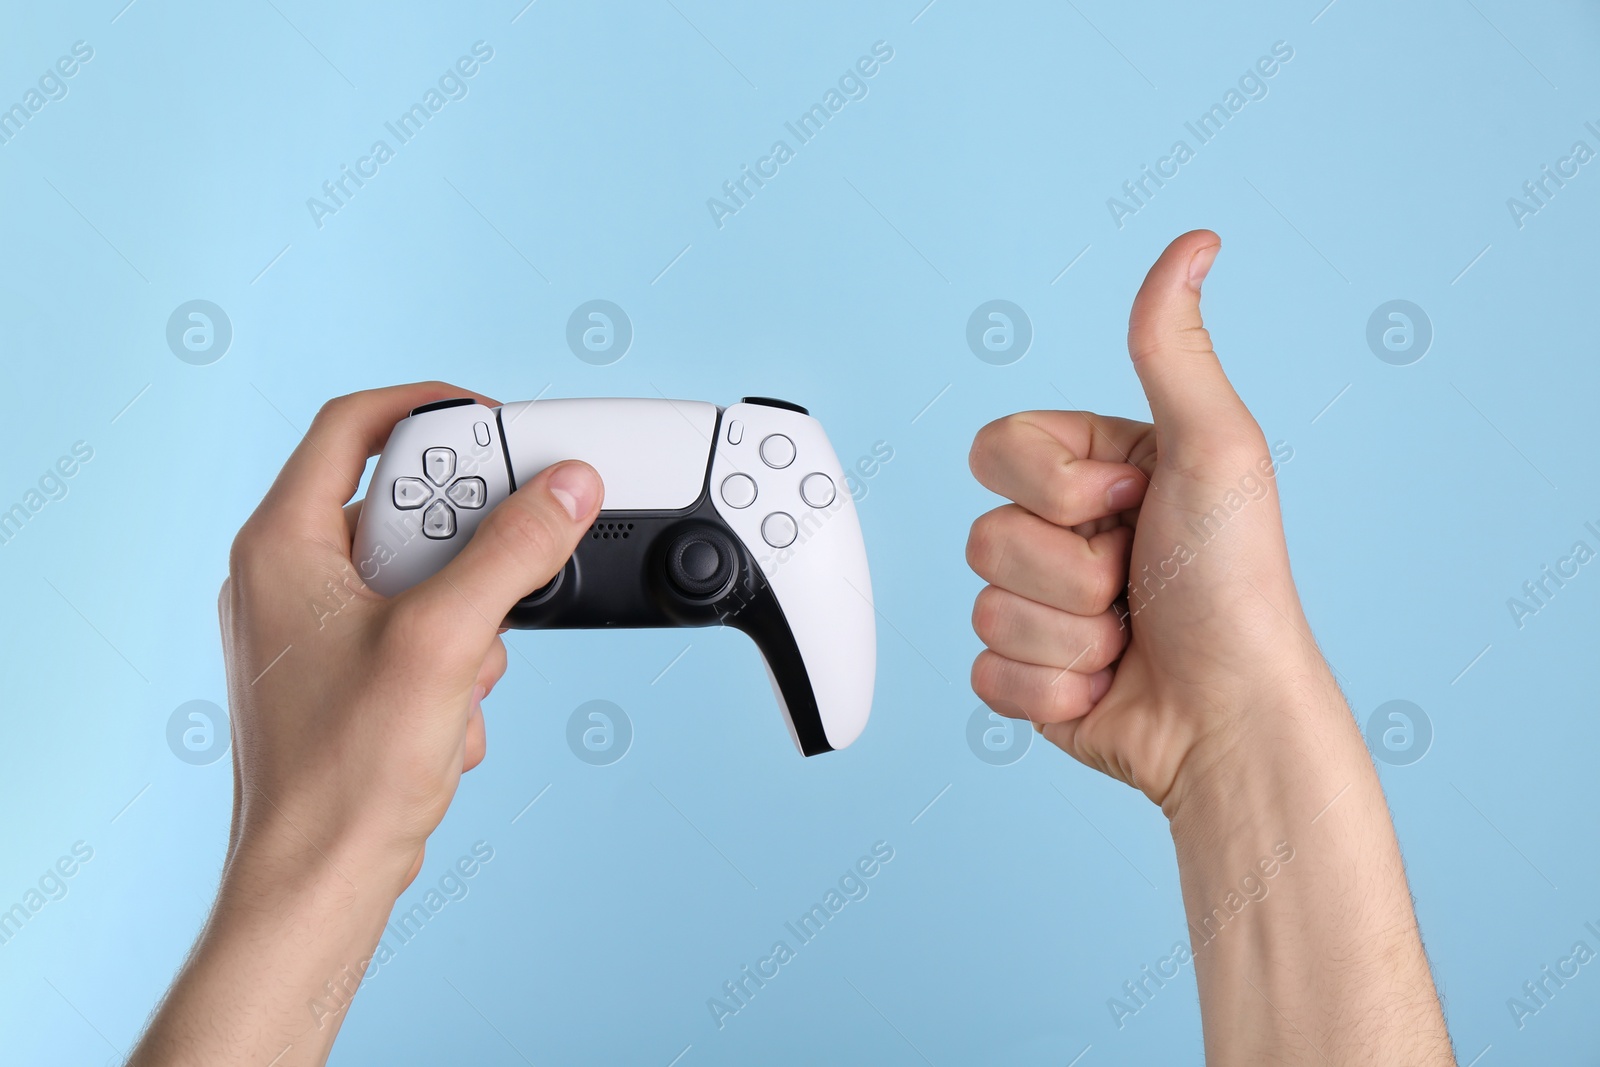 Photo of Man using wireless game controller and showing thumbs up on light blue background, closeup